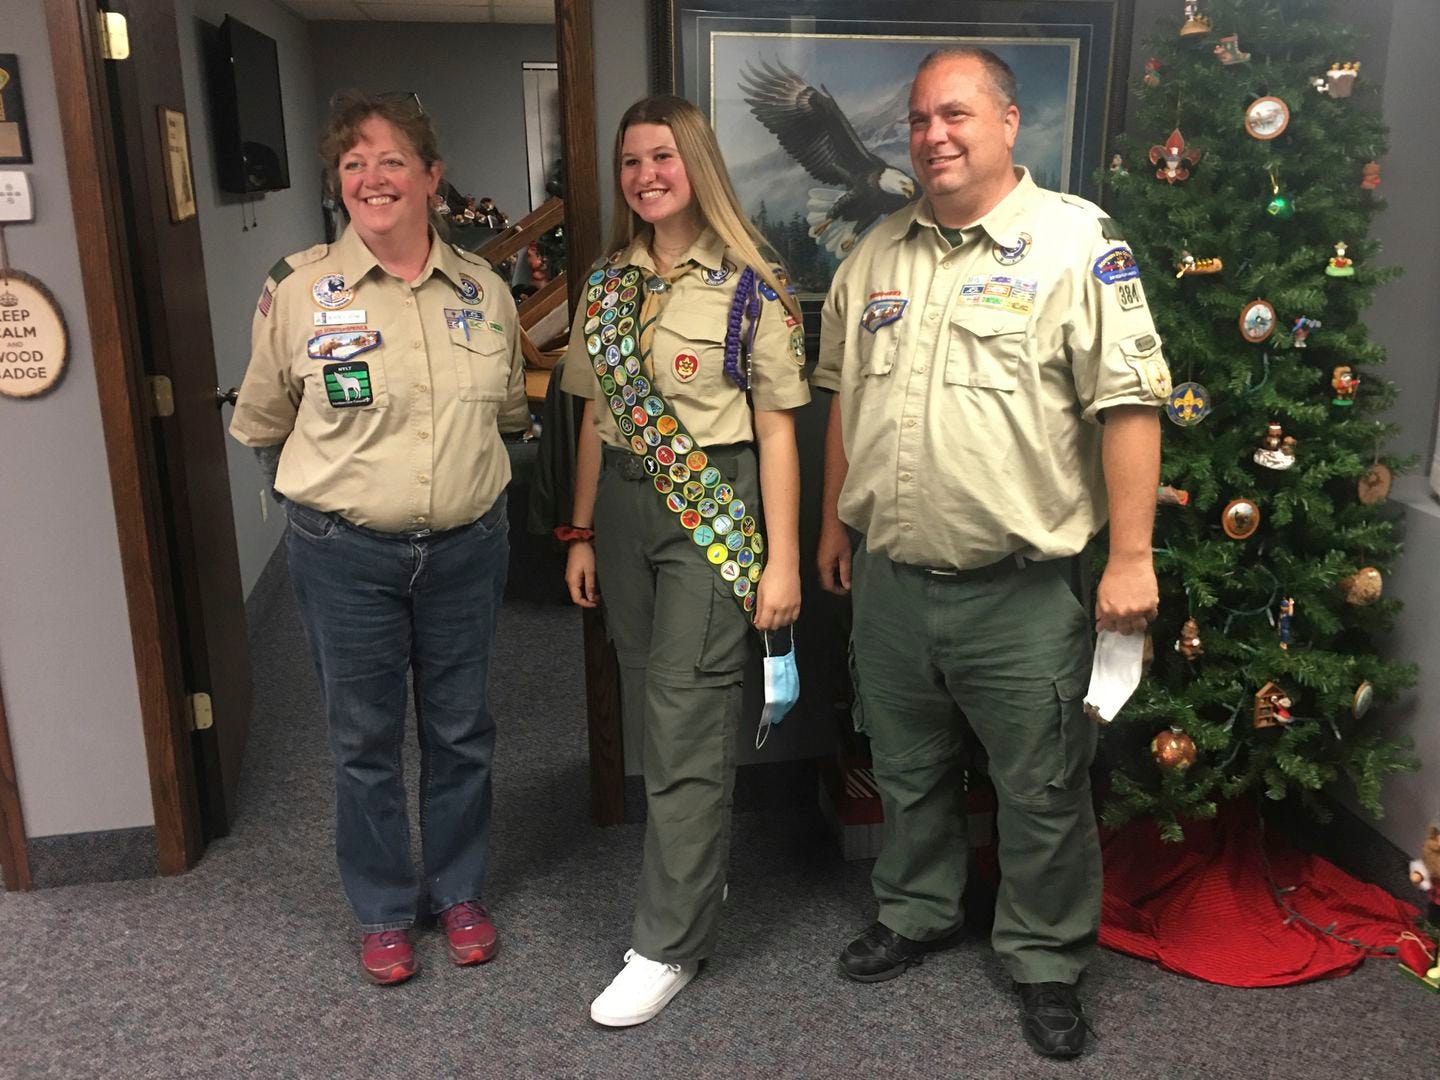 Isabella Tunney (center) will be one of nearly 1,000 girls and young women honored by the Boy Scouts in a virtual celebration of the inaugural class of female Eagle Scouts.